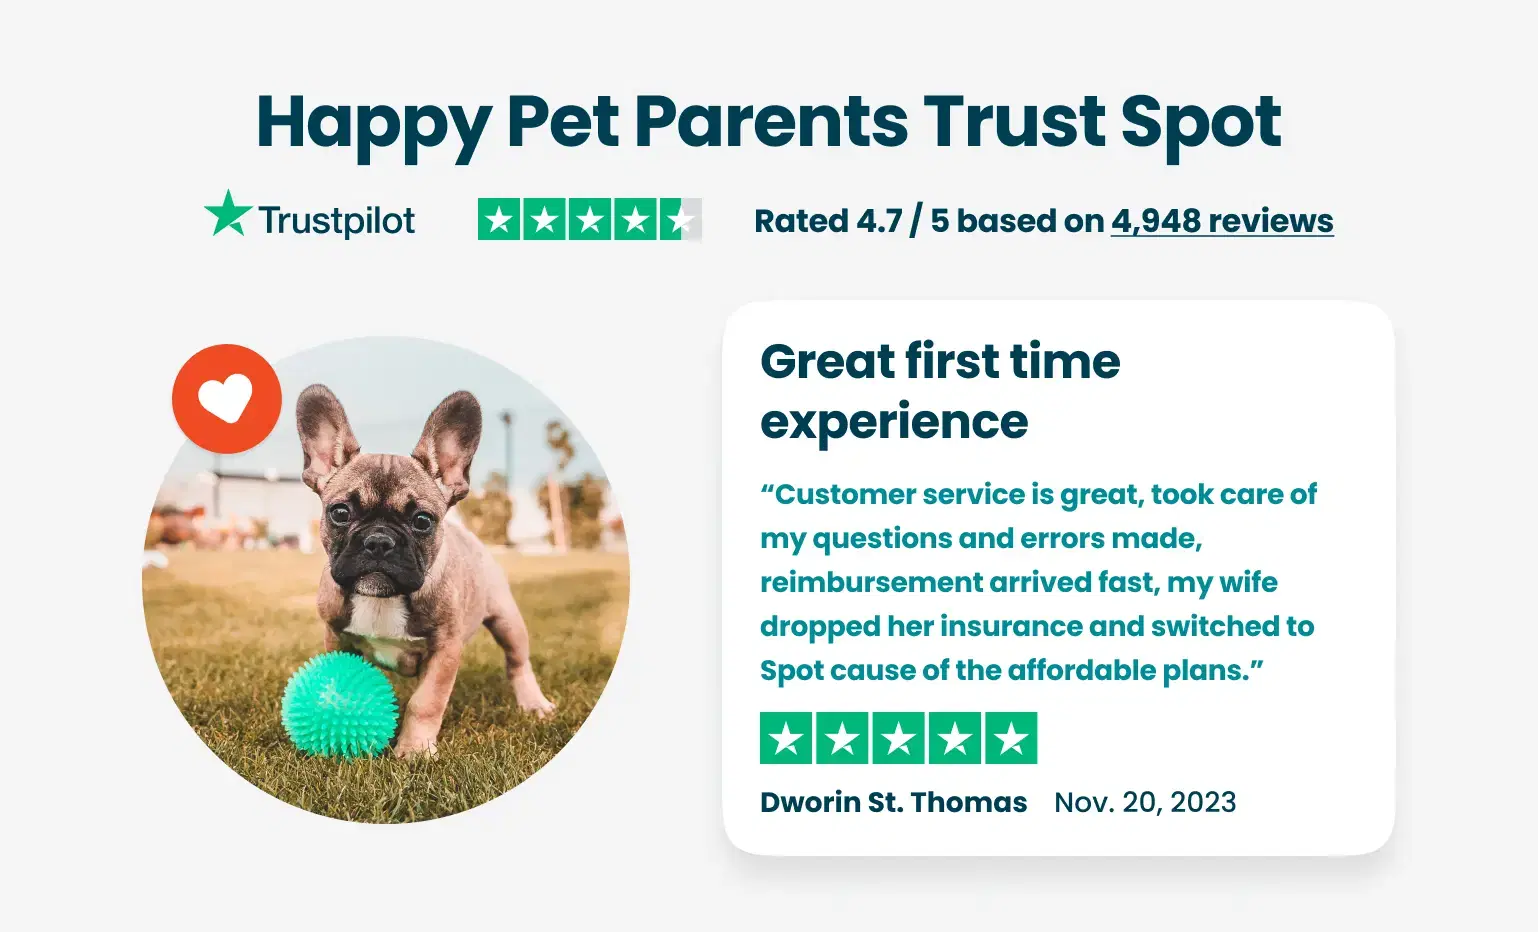 A French Bulldog puppy with a green toy ball and a Spot pet insurance rating of 4.7/5 from 4948 reviews.